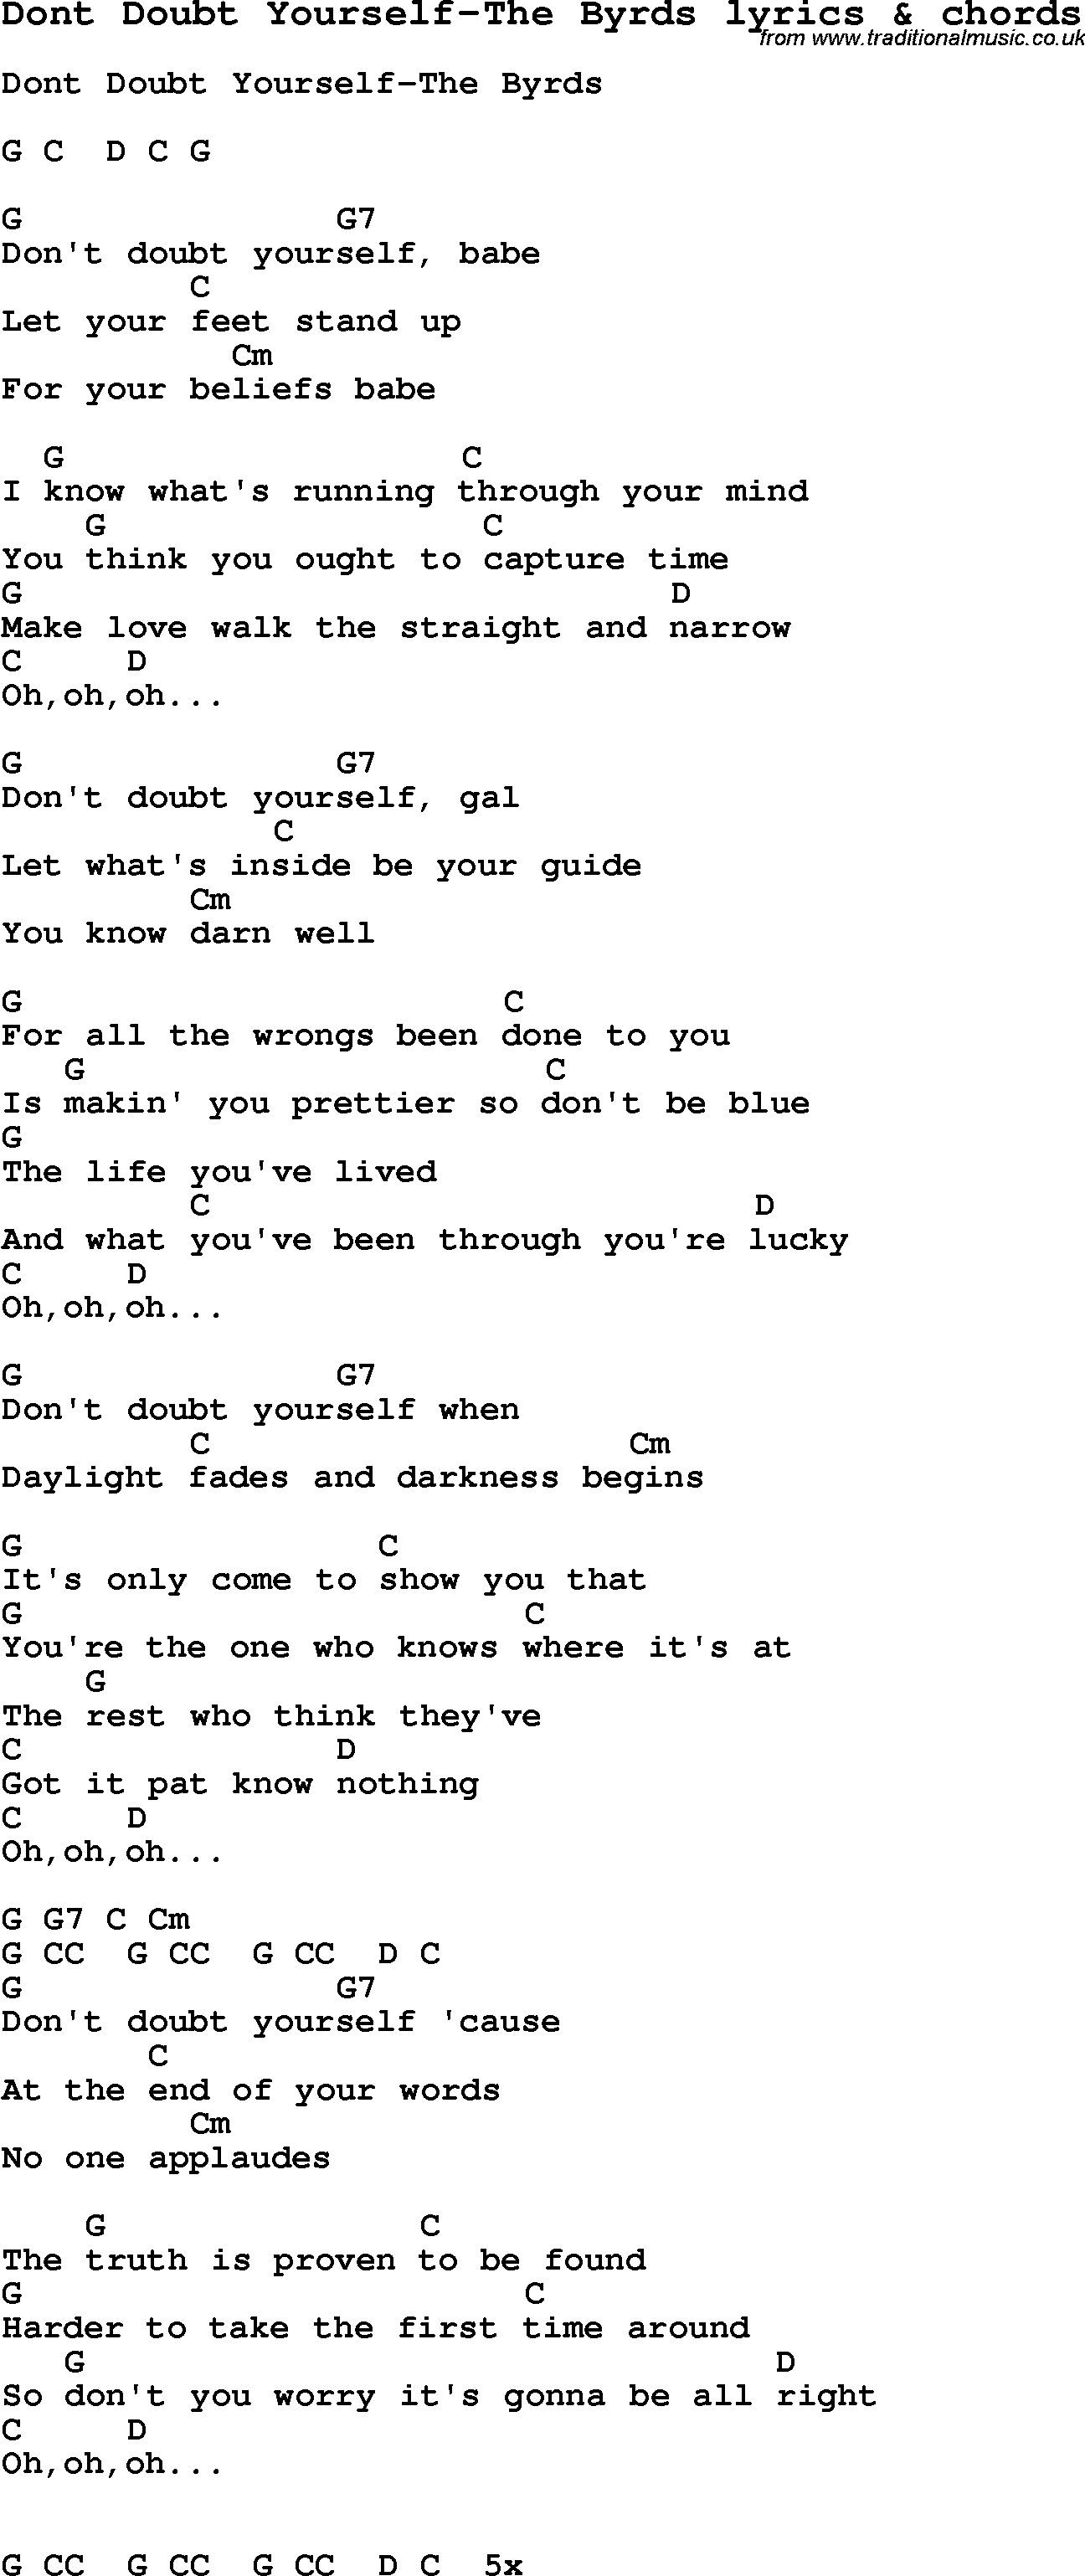 Love Song Lyrics for: Dont Doubt Yourself-The Byrds with chords for Ukulele, Guitar Banjo etc.